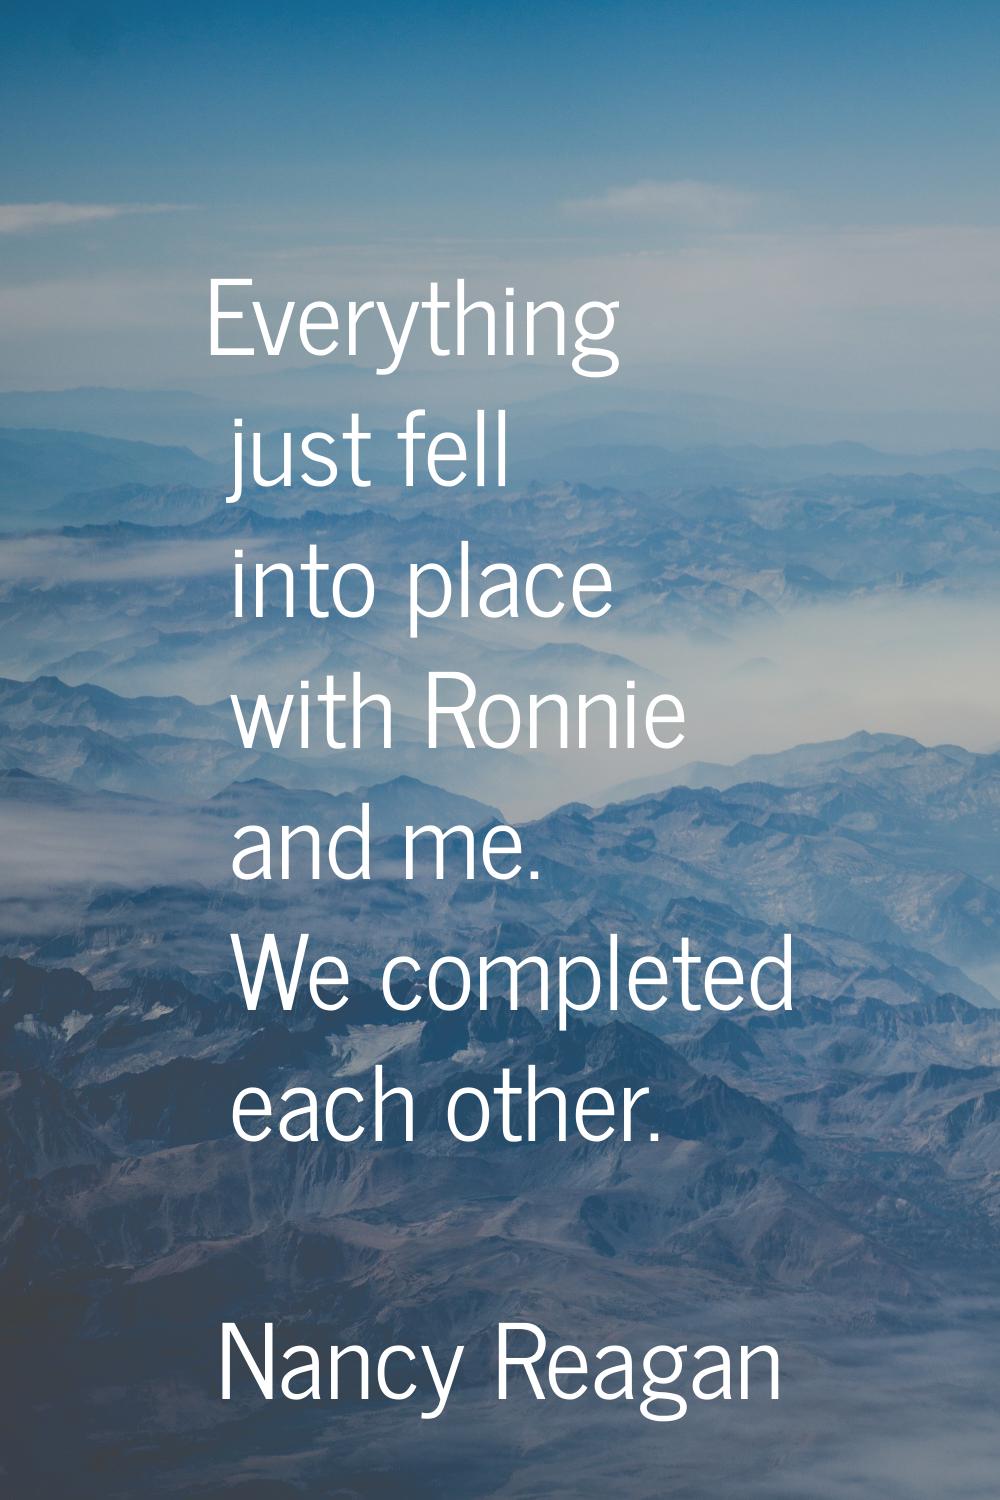 Everything just fell into place with Ronnie and me. We completed each other.